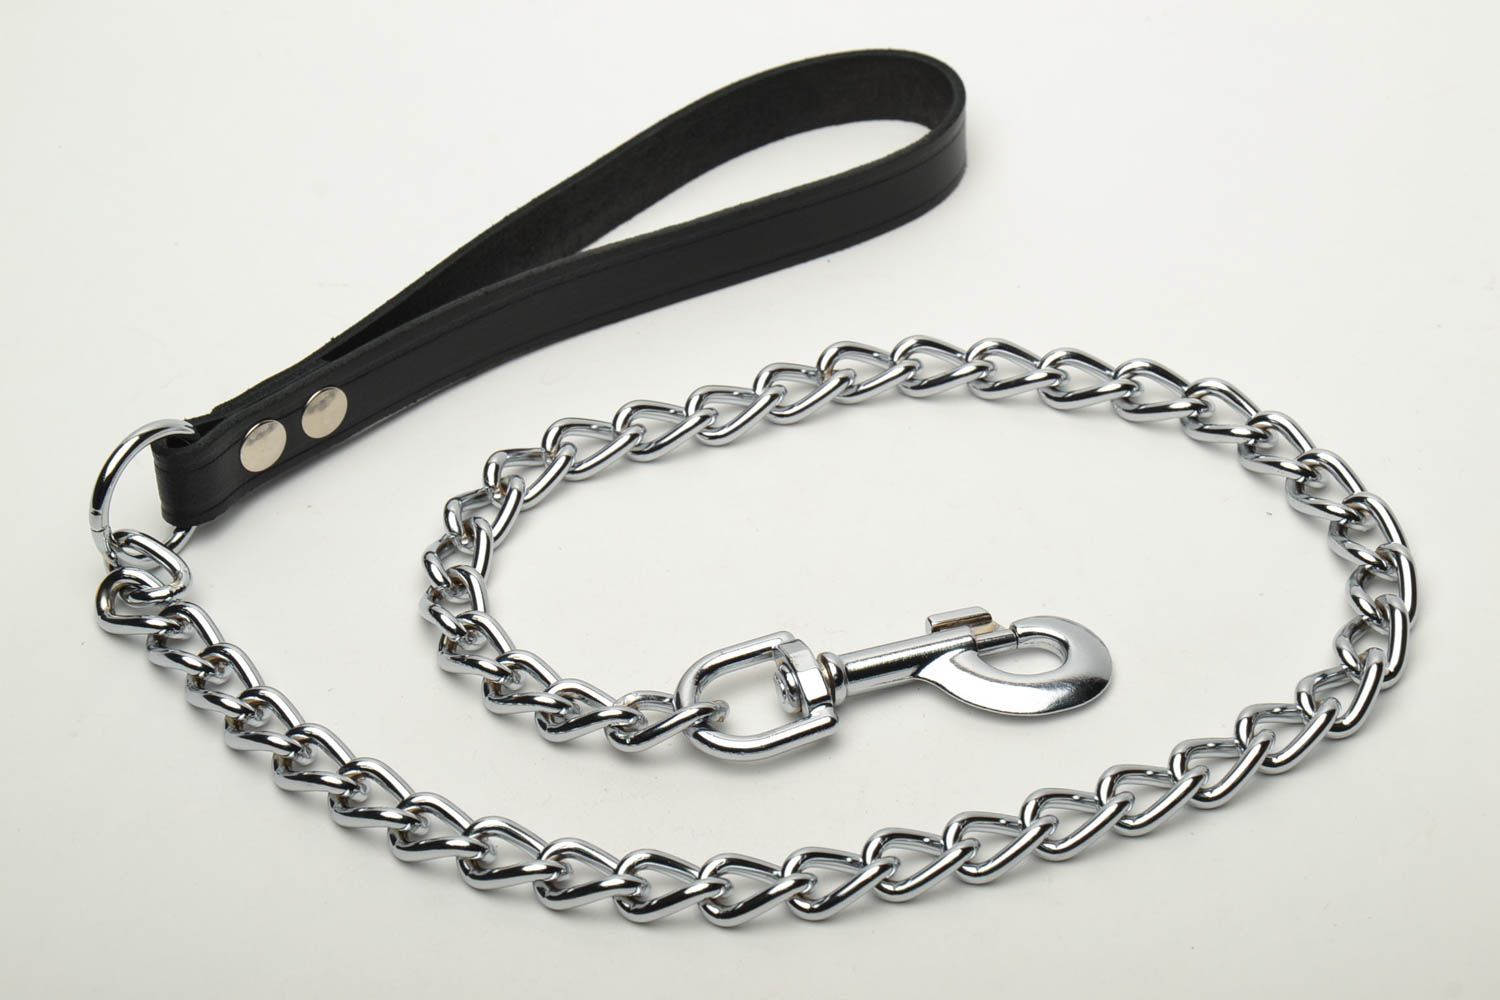 Strong metal and leather dog lead photo 2